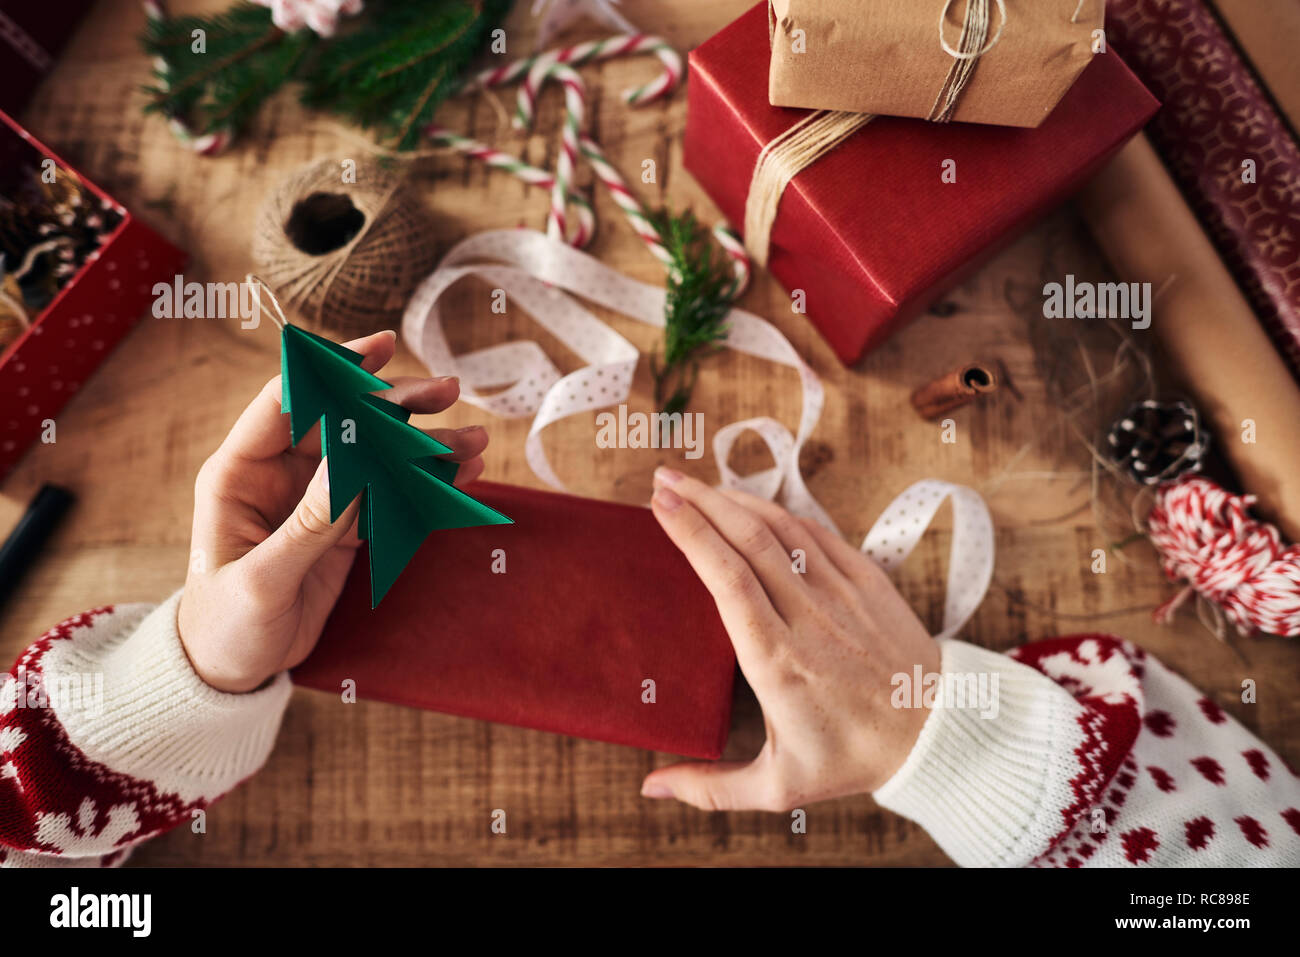 Woman attaching Christmas tree shaped decoration on Christmas present Stock Photo